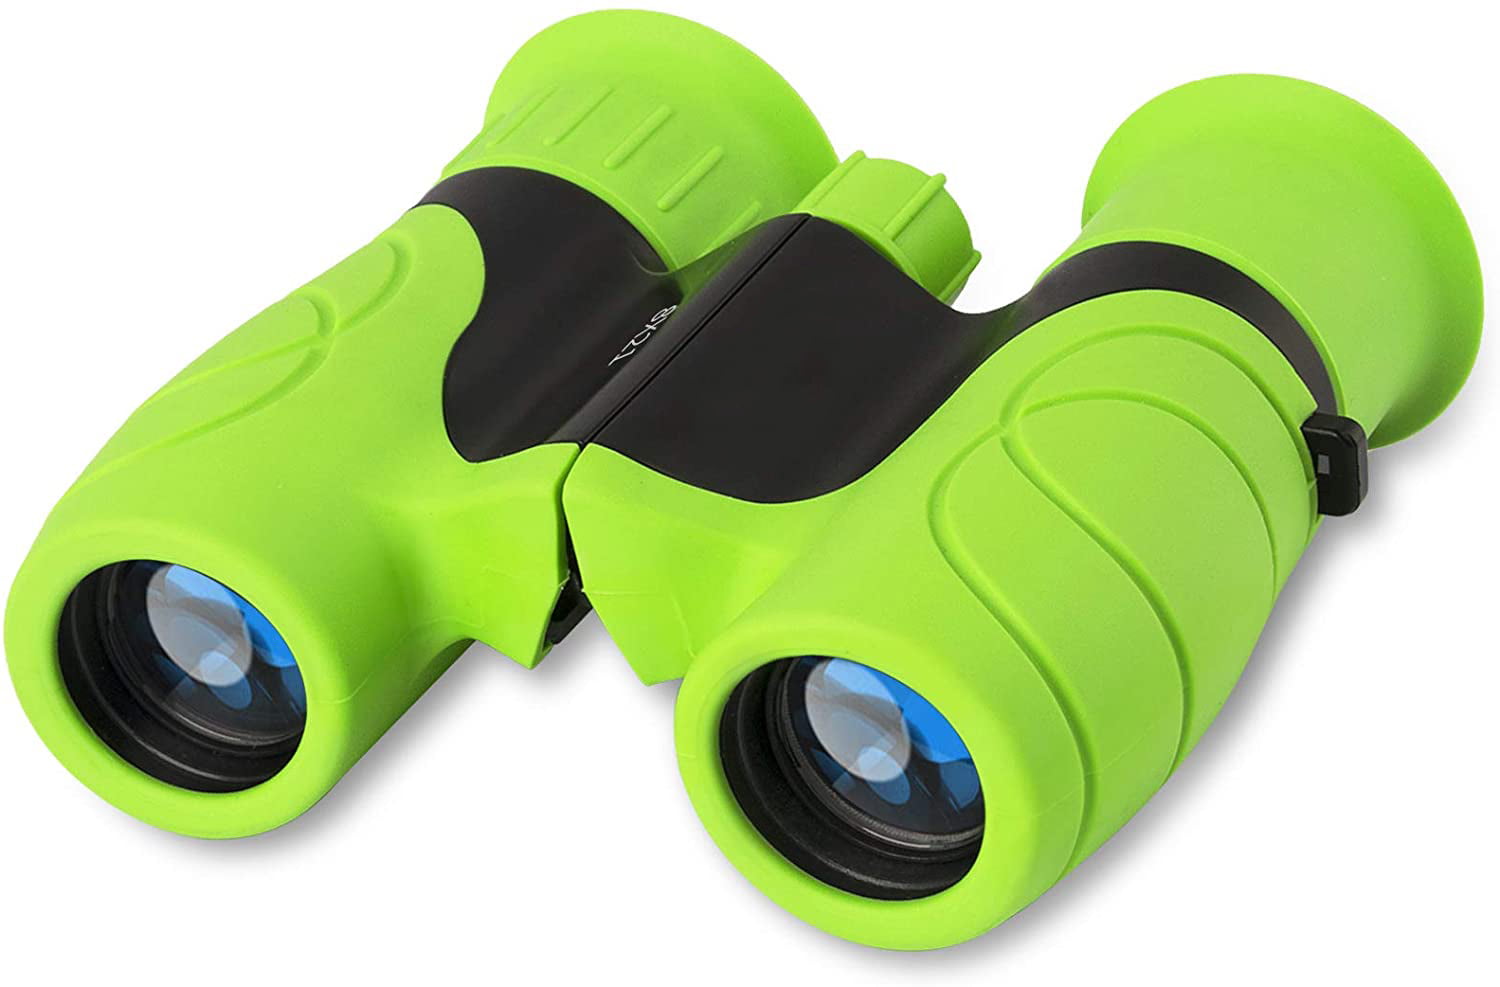 Binoculars for Kids High-Resolution 8x21 Gift for Boys & Girls Shockproof Compact Kids Binoculars for Bird Watching Spy Games & Exploration Hiking Learning Travel Camping 